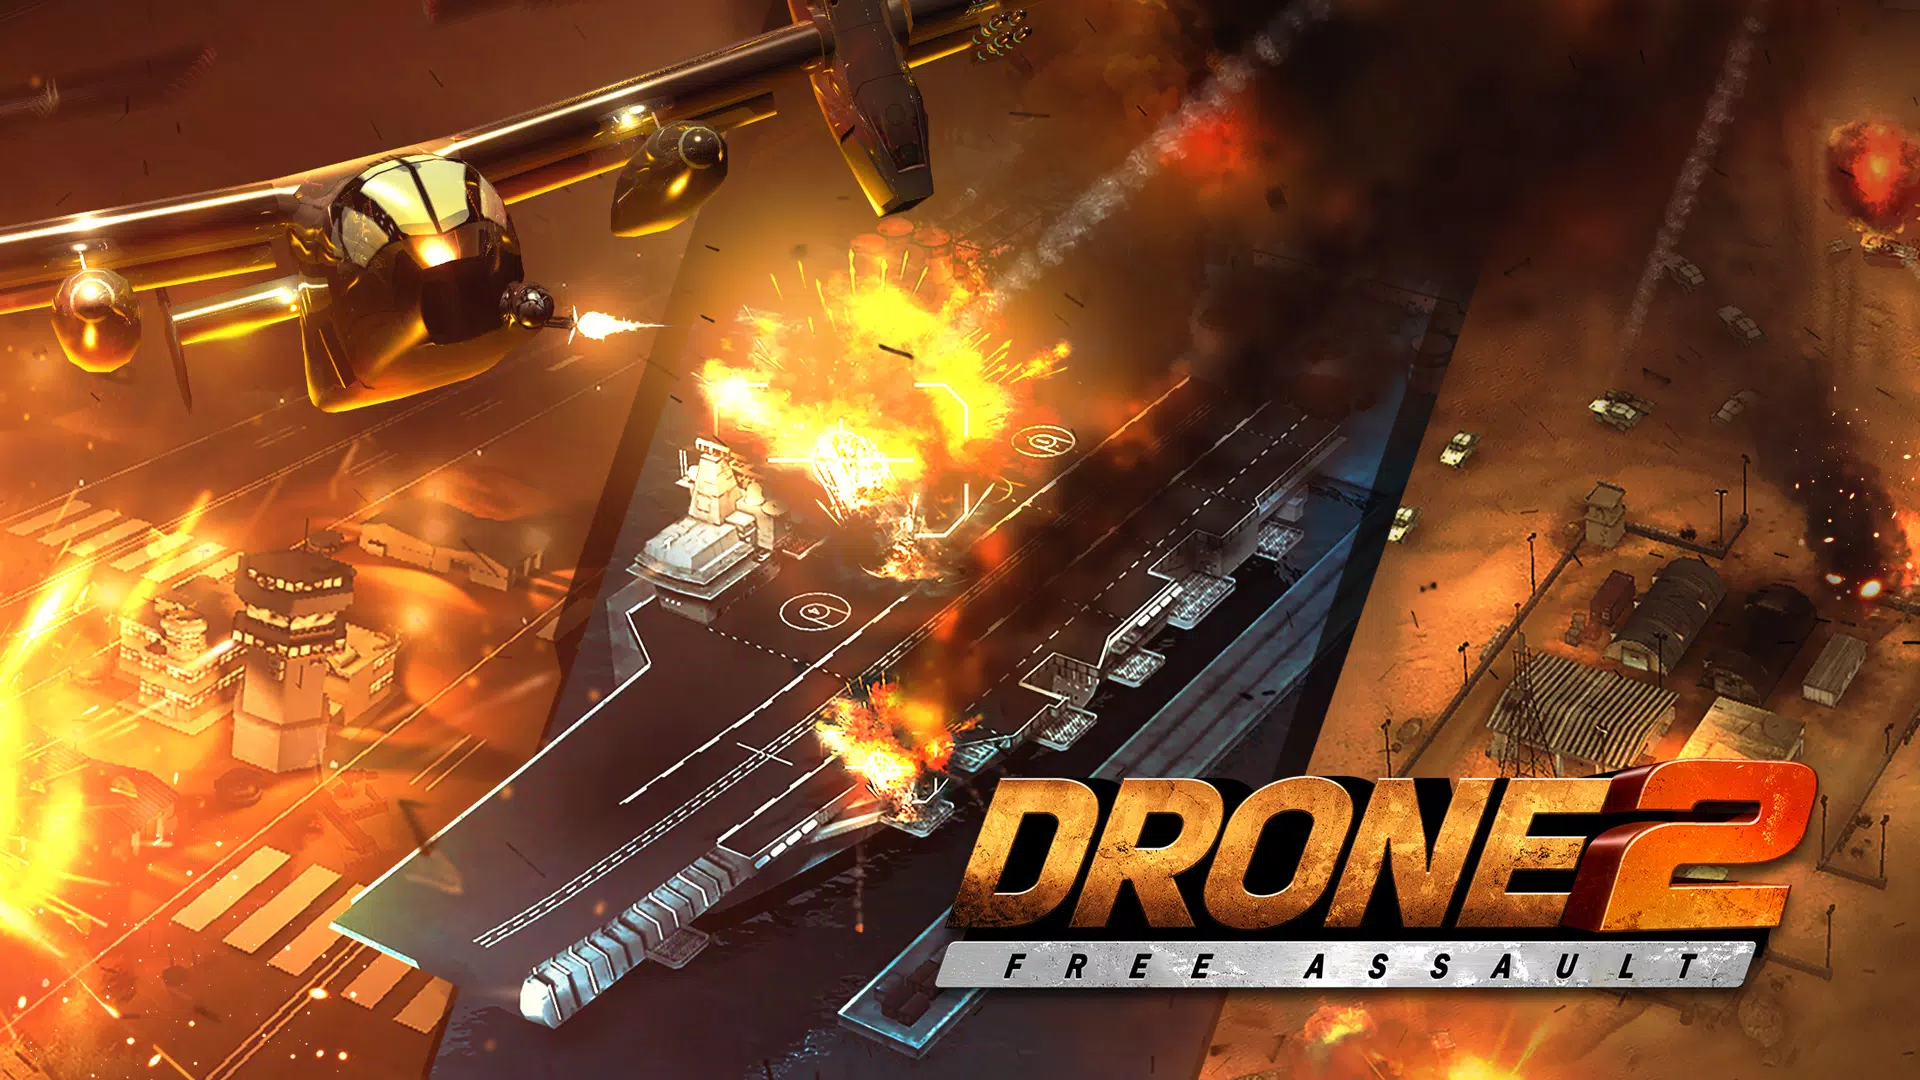 Drone 2 Free Assault for Android - APK Download